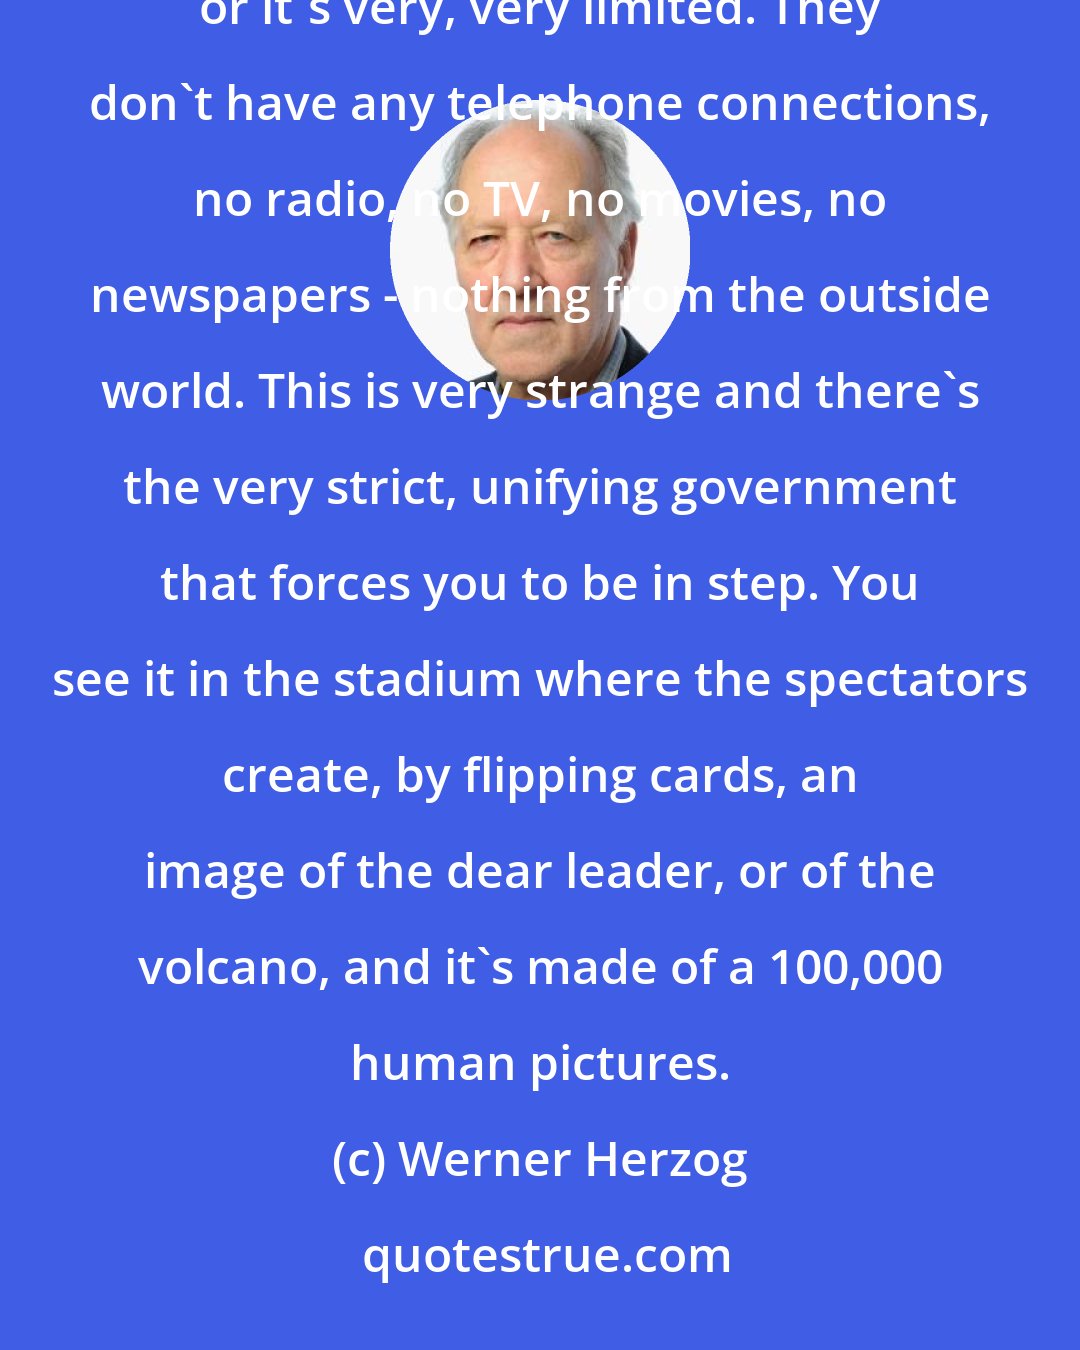 Werner Herzog: It's very enigmatic because of course, the population [of North Korea] has no contact with the world outside or it's very, very limited. They don't have any telephone connections, no radio, no TV, no movies, no newspapers - nothing from the outside world. This is very strange and there's the very strict, unifying government that forces you to be in step. You see it in the stadium where the spectators create, by flipping cards, an image of the dear leader, or of the volcano, and it's made of a 100,000 human pictures.